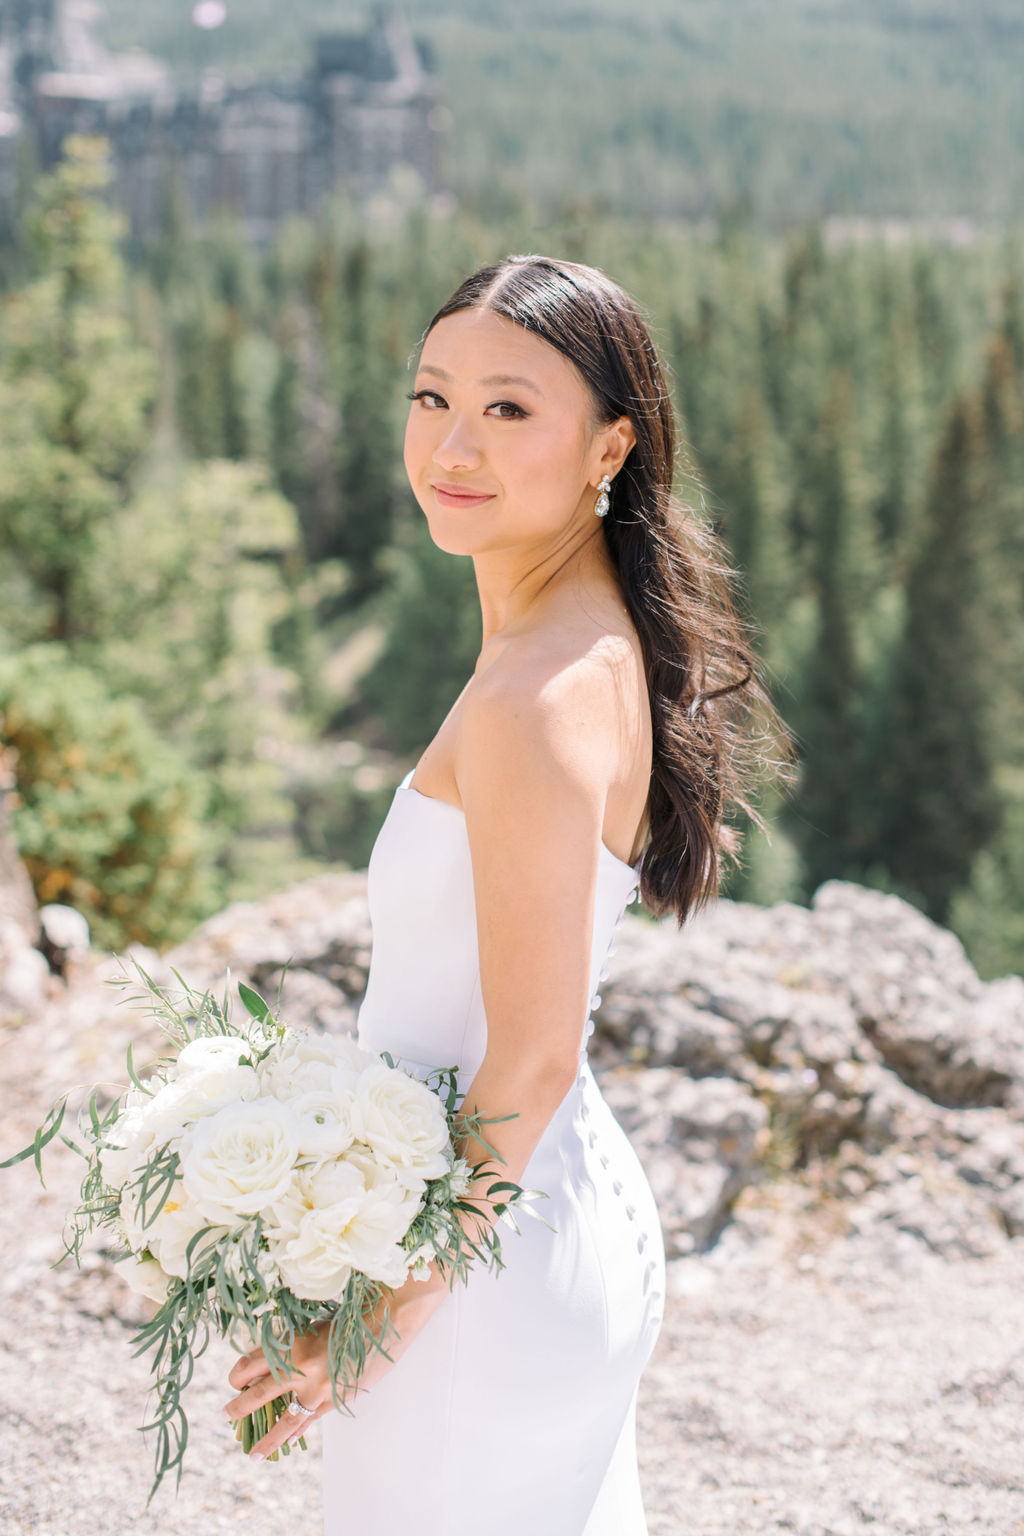 Bride wearing sleek form fitting white bridal gown, holding classic bouquet of white roses and greenery. Summer wedding inspiration in Banff, Alberta. 